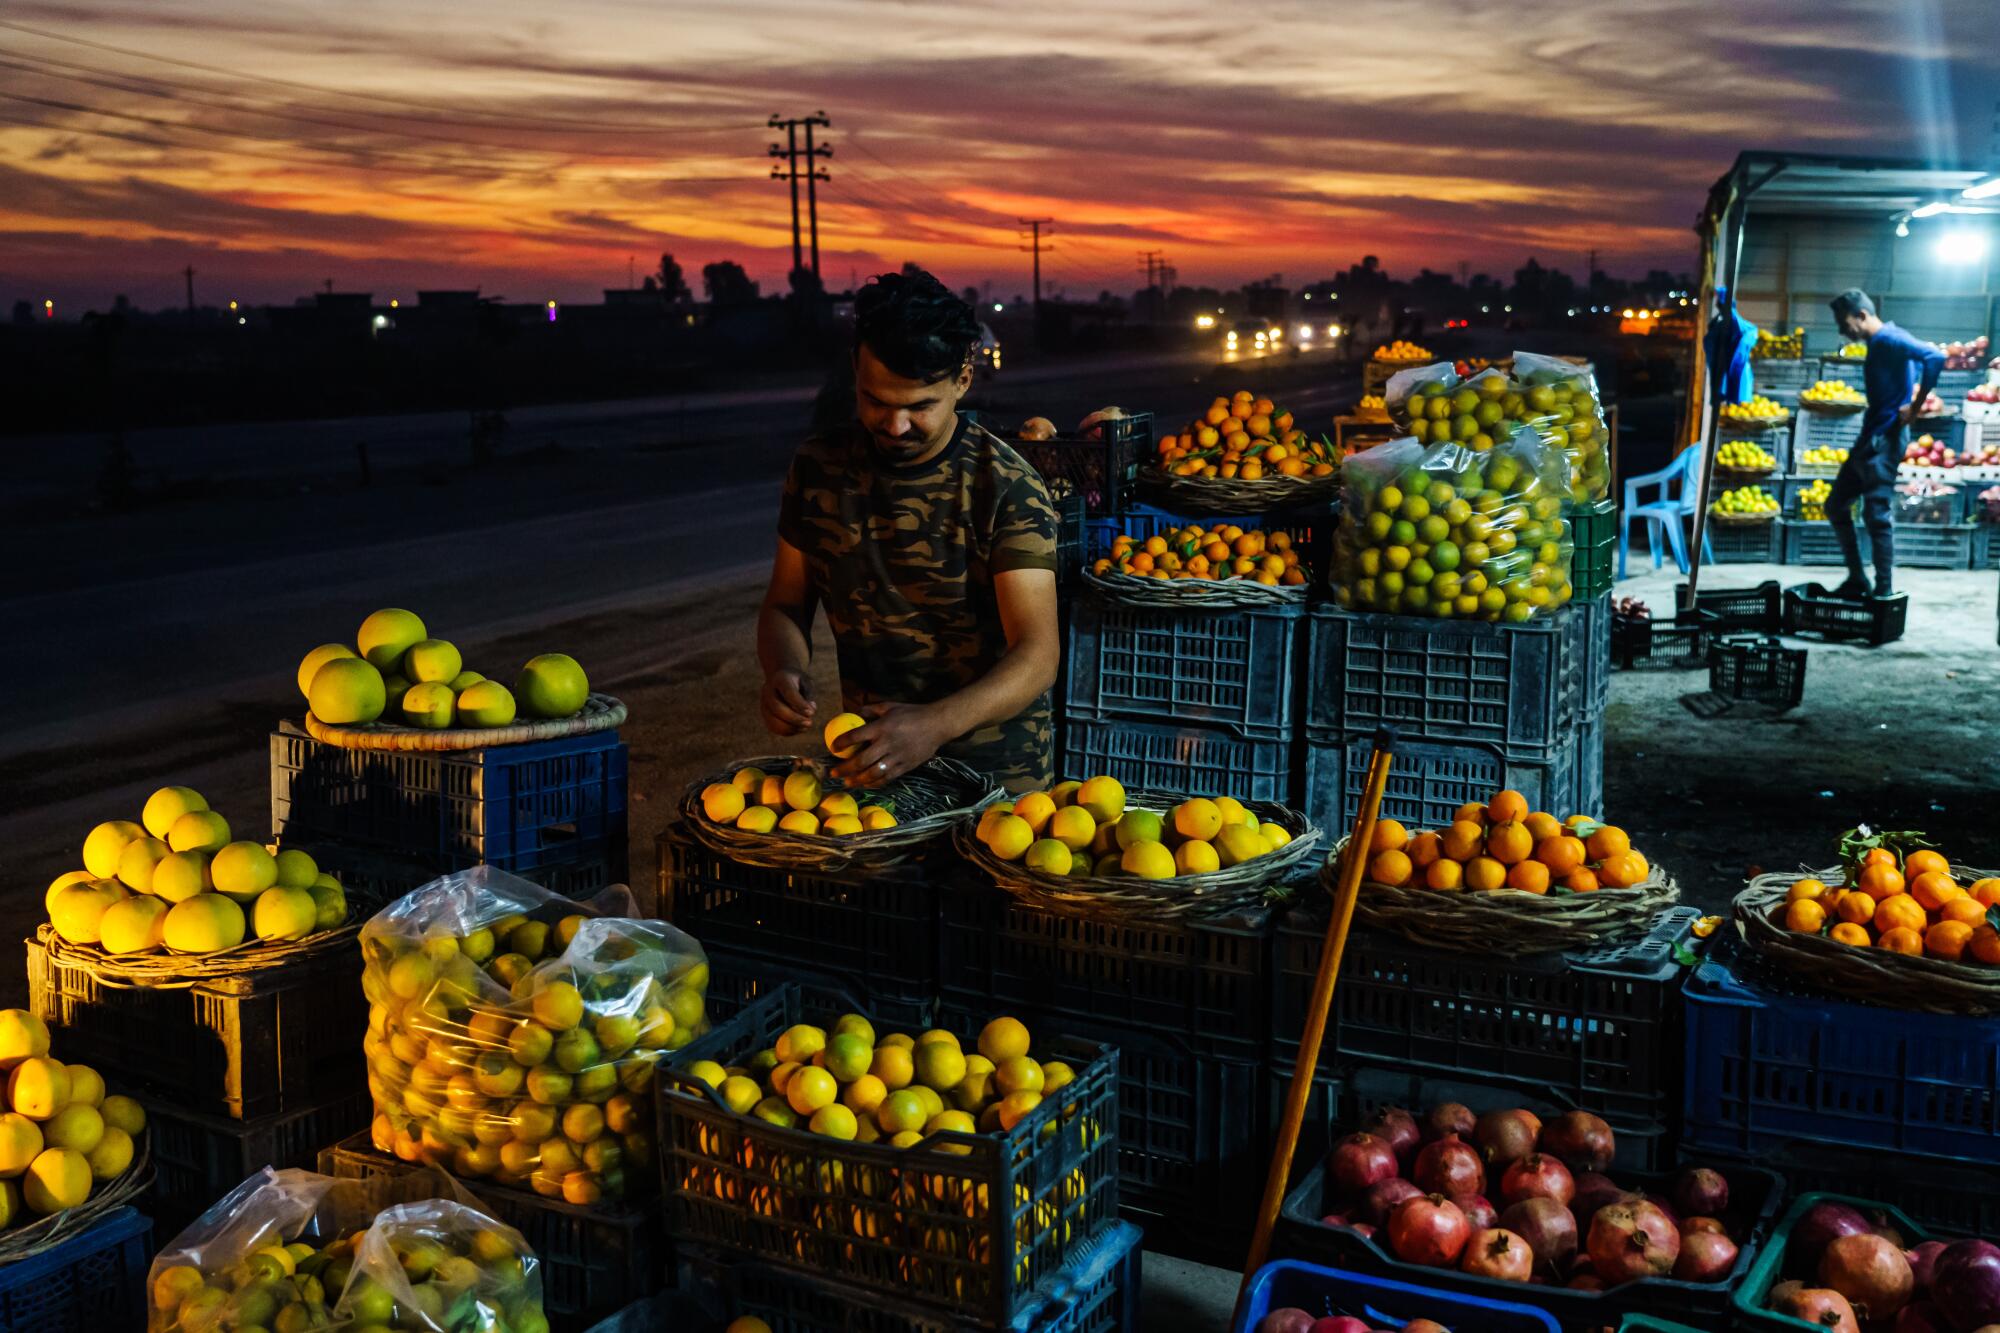 A man hold a piece of fruit as he stands amid produce piled in crates, baskets and plastic bags along the side of a highway
